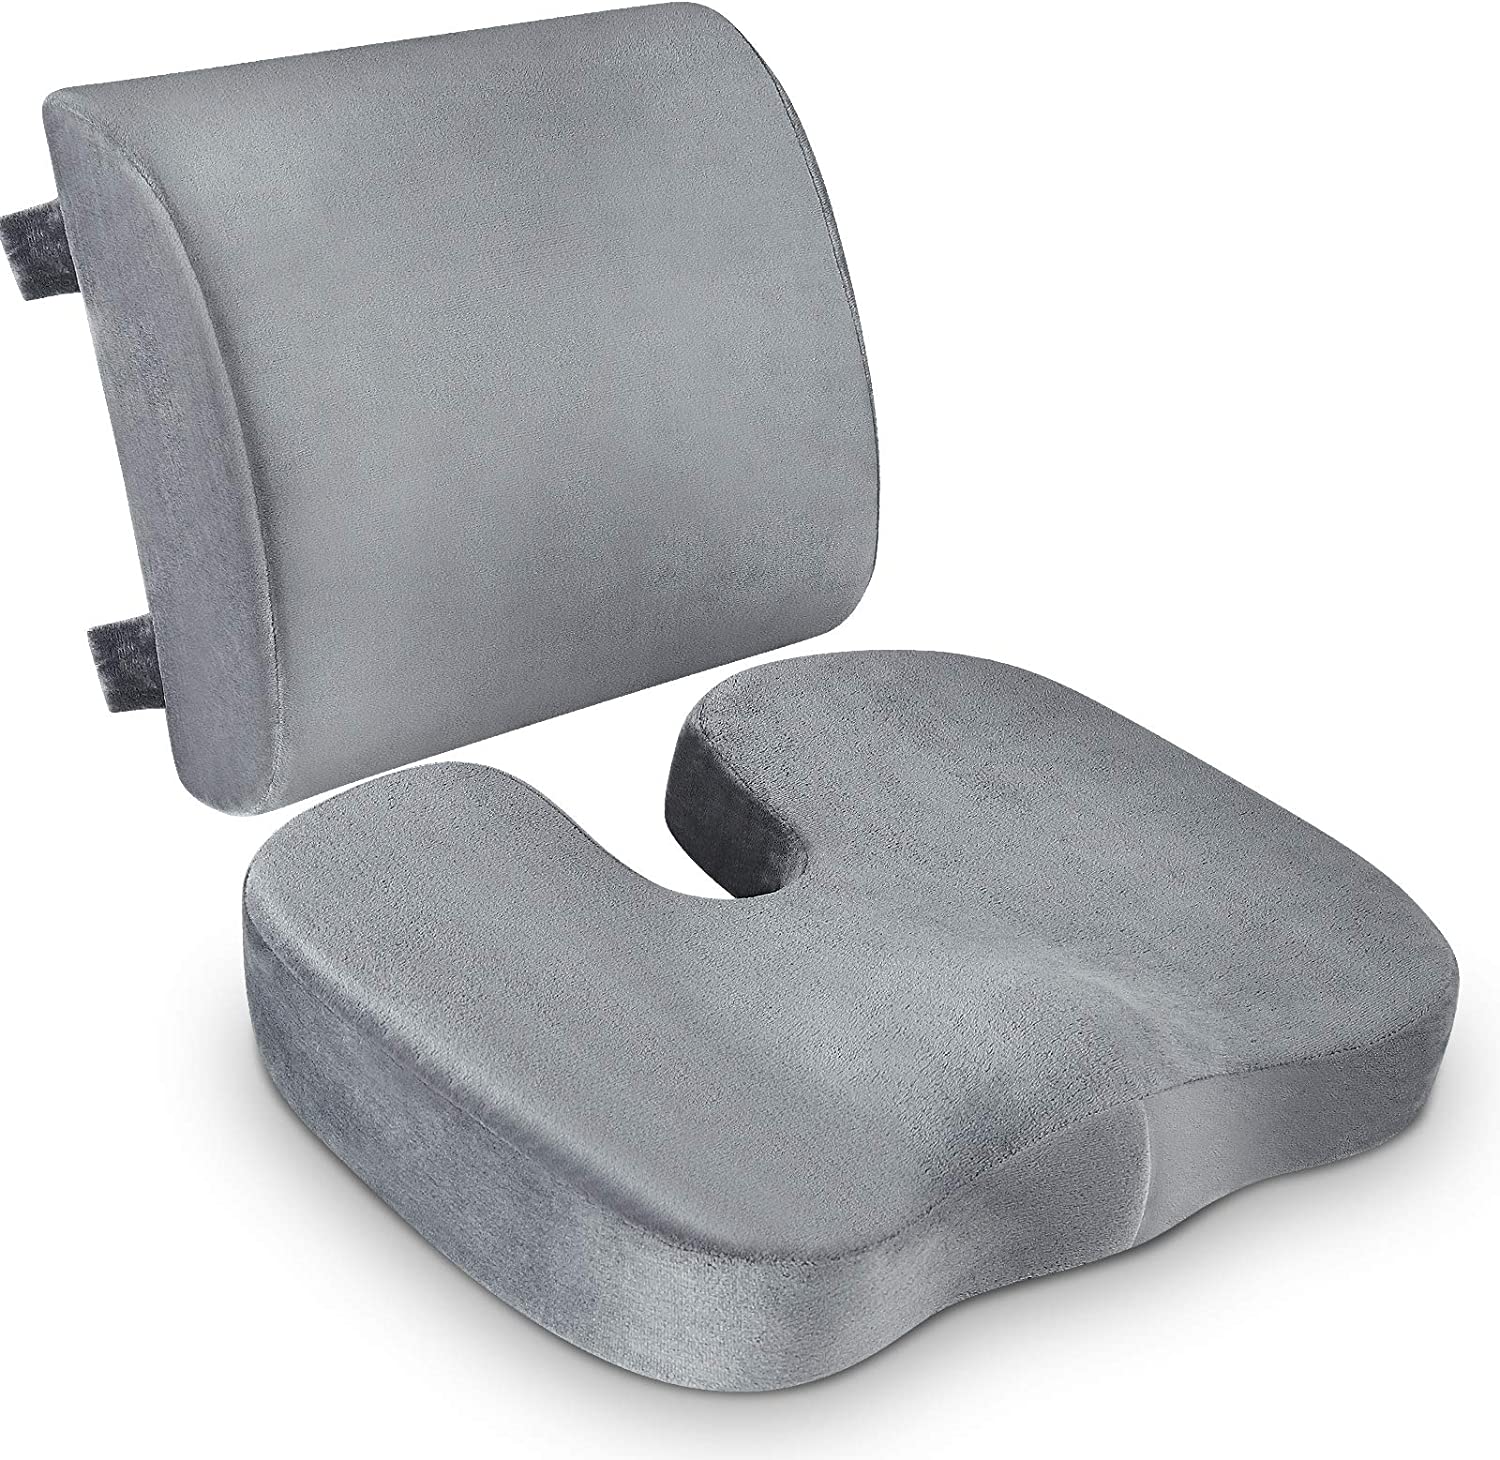 Qutool ADS11109 Seat Cushion & Lumbar Support Pillow for Office